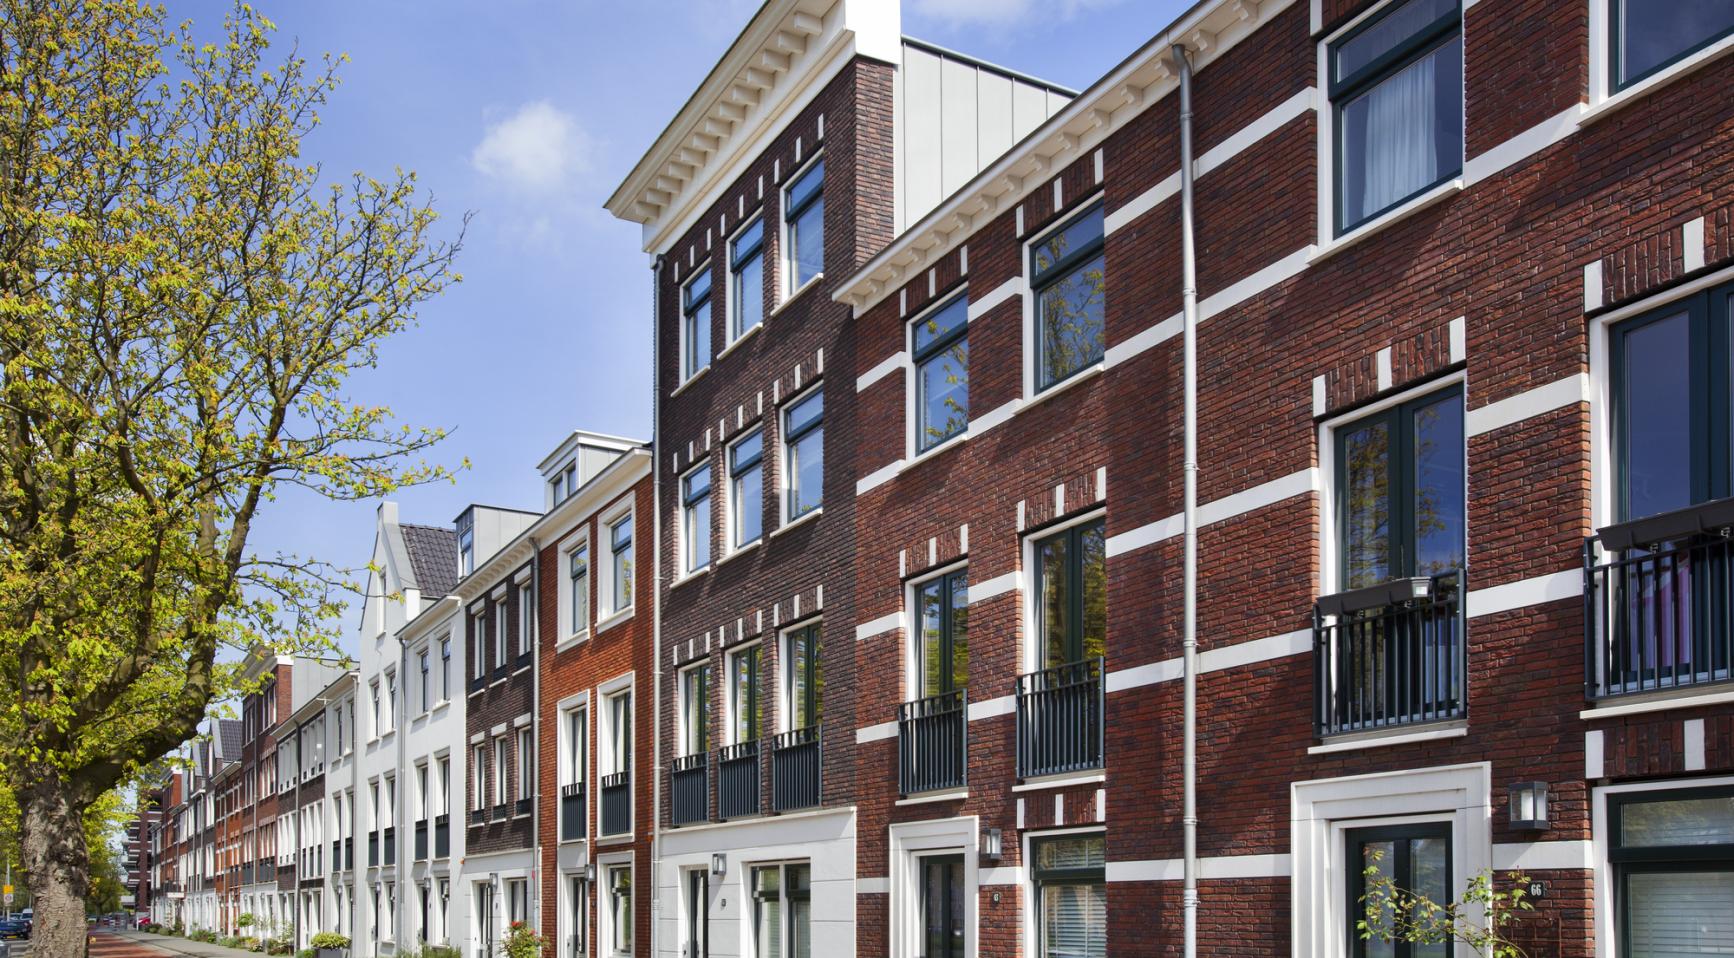 Over 60% Of Netherlands Homes Are Under-Occupied